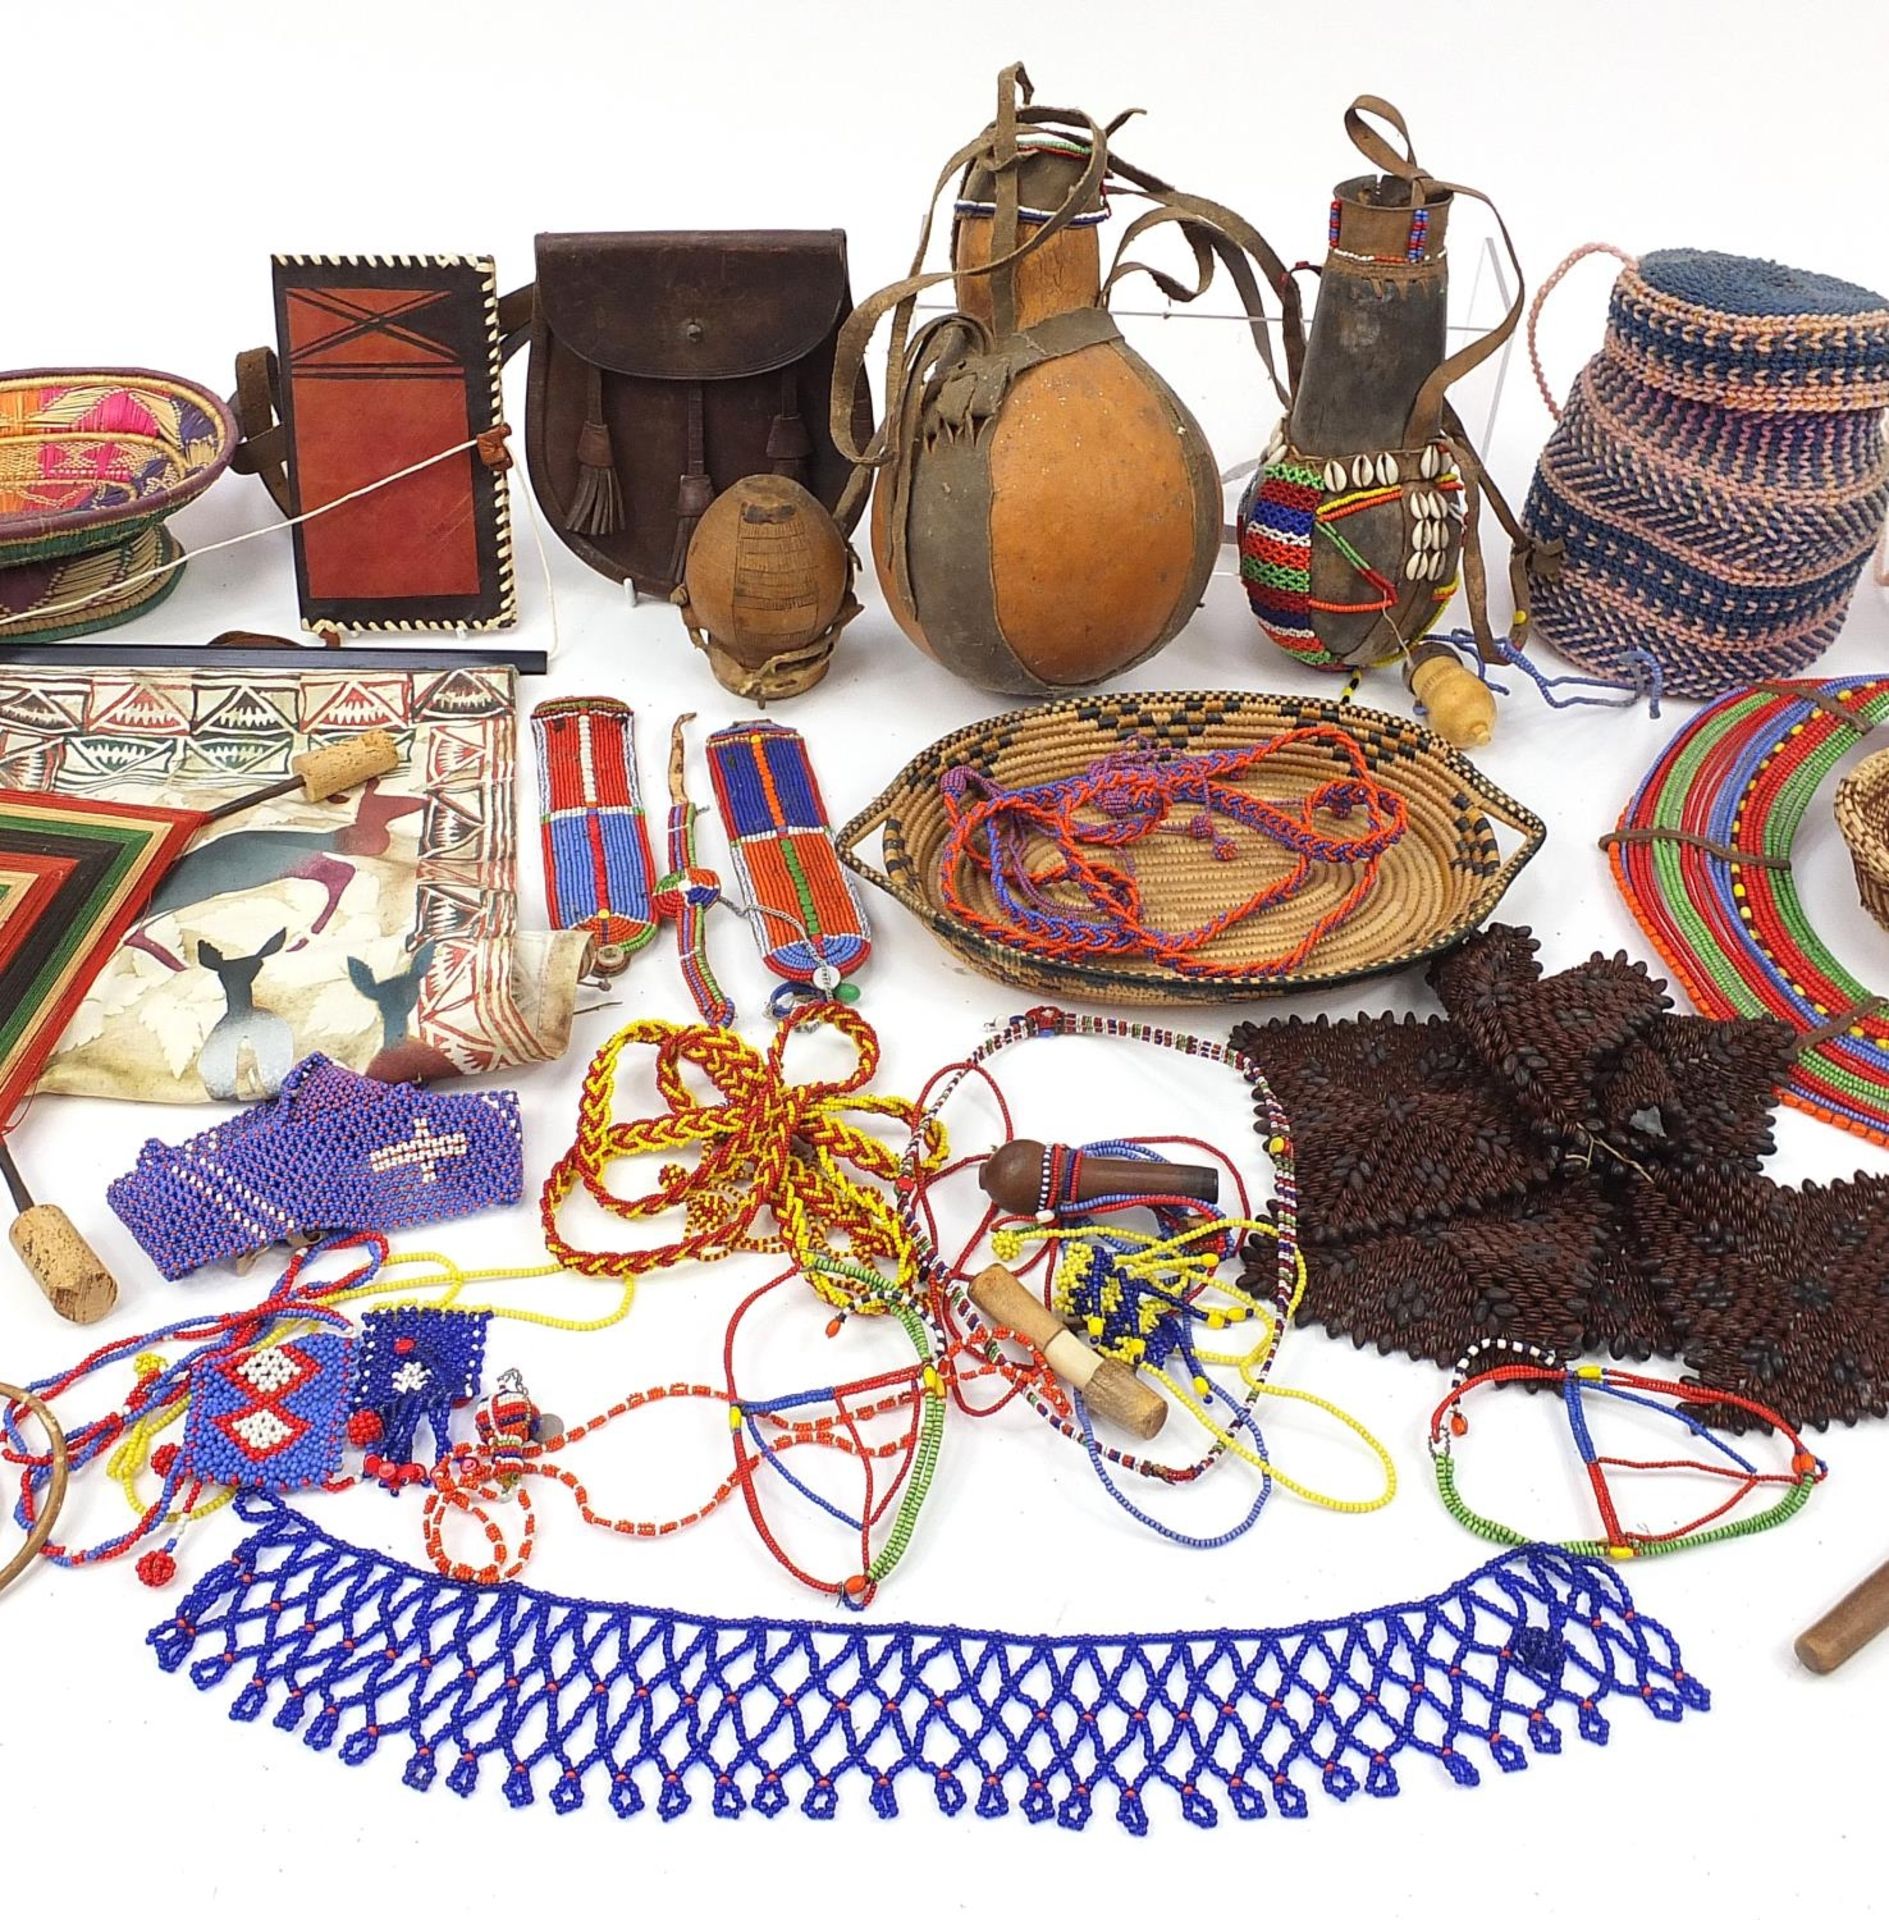 Tribal interest items including a carved wood headrest, gourd vessel with beadwork, tie-dye panels - Image 3 of 5